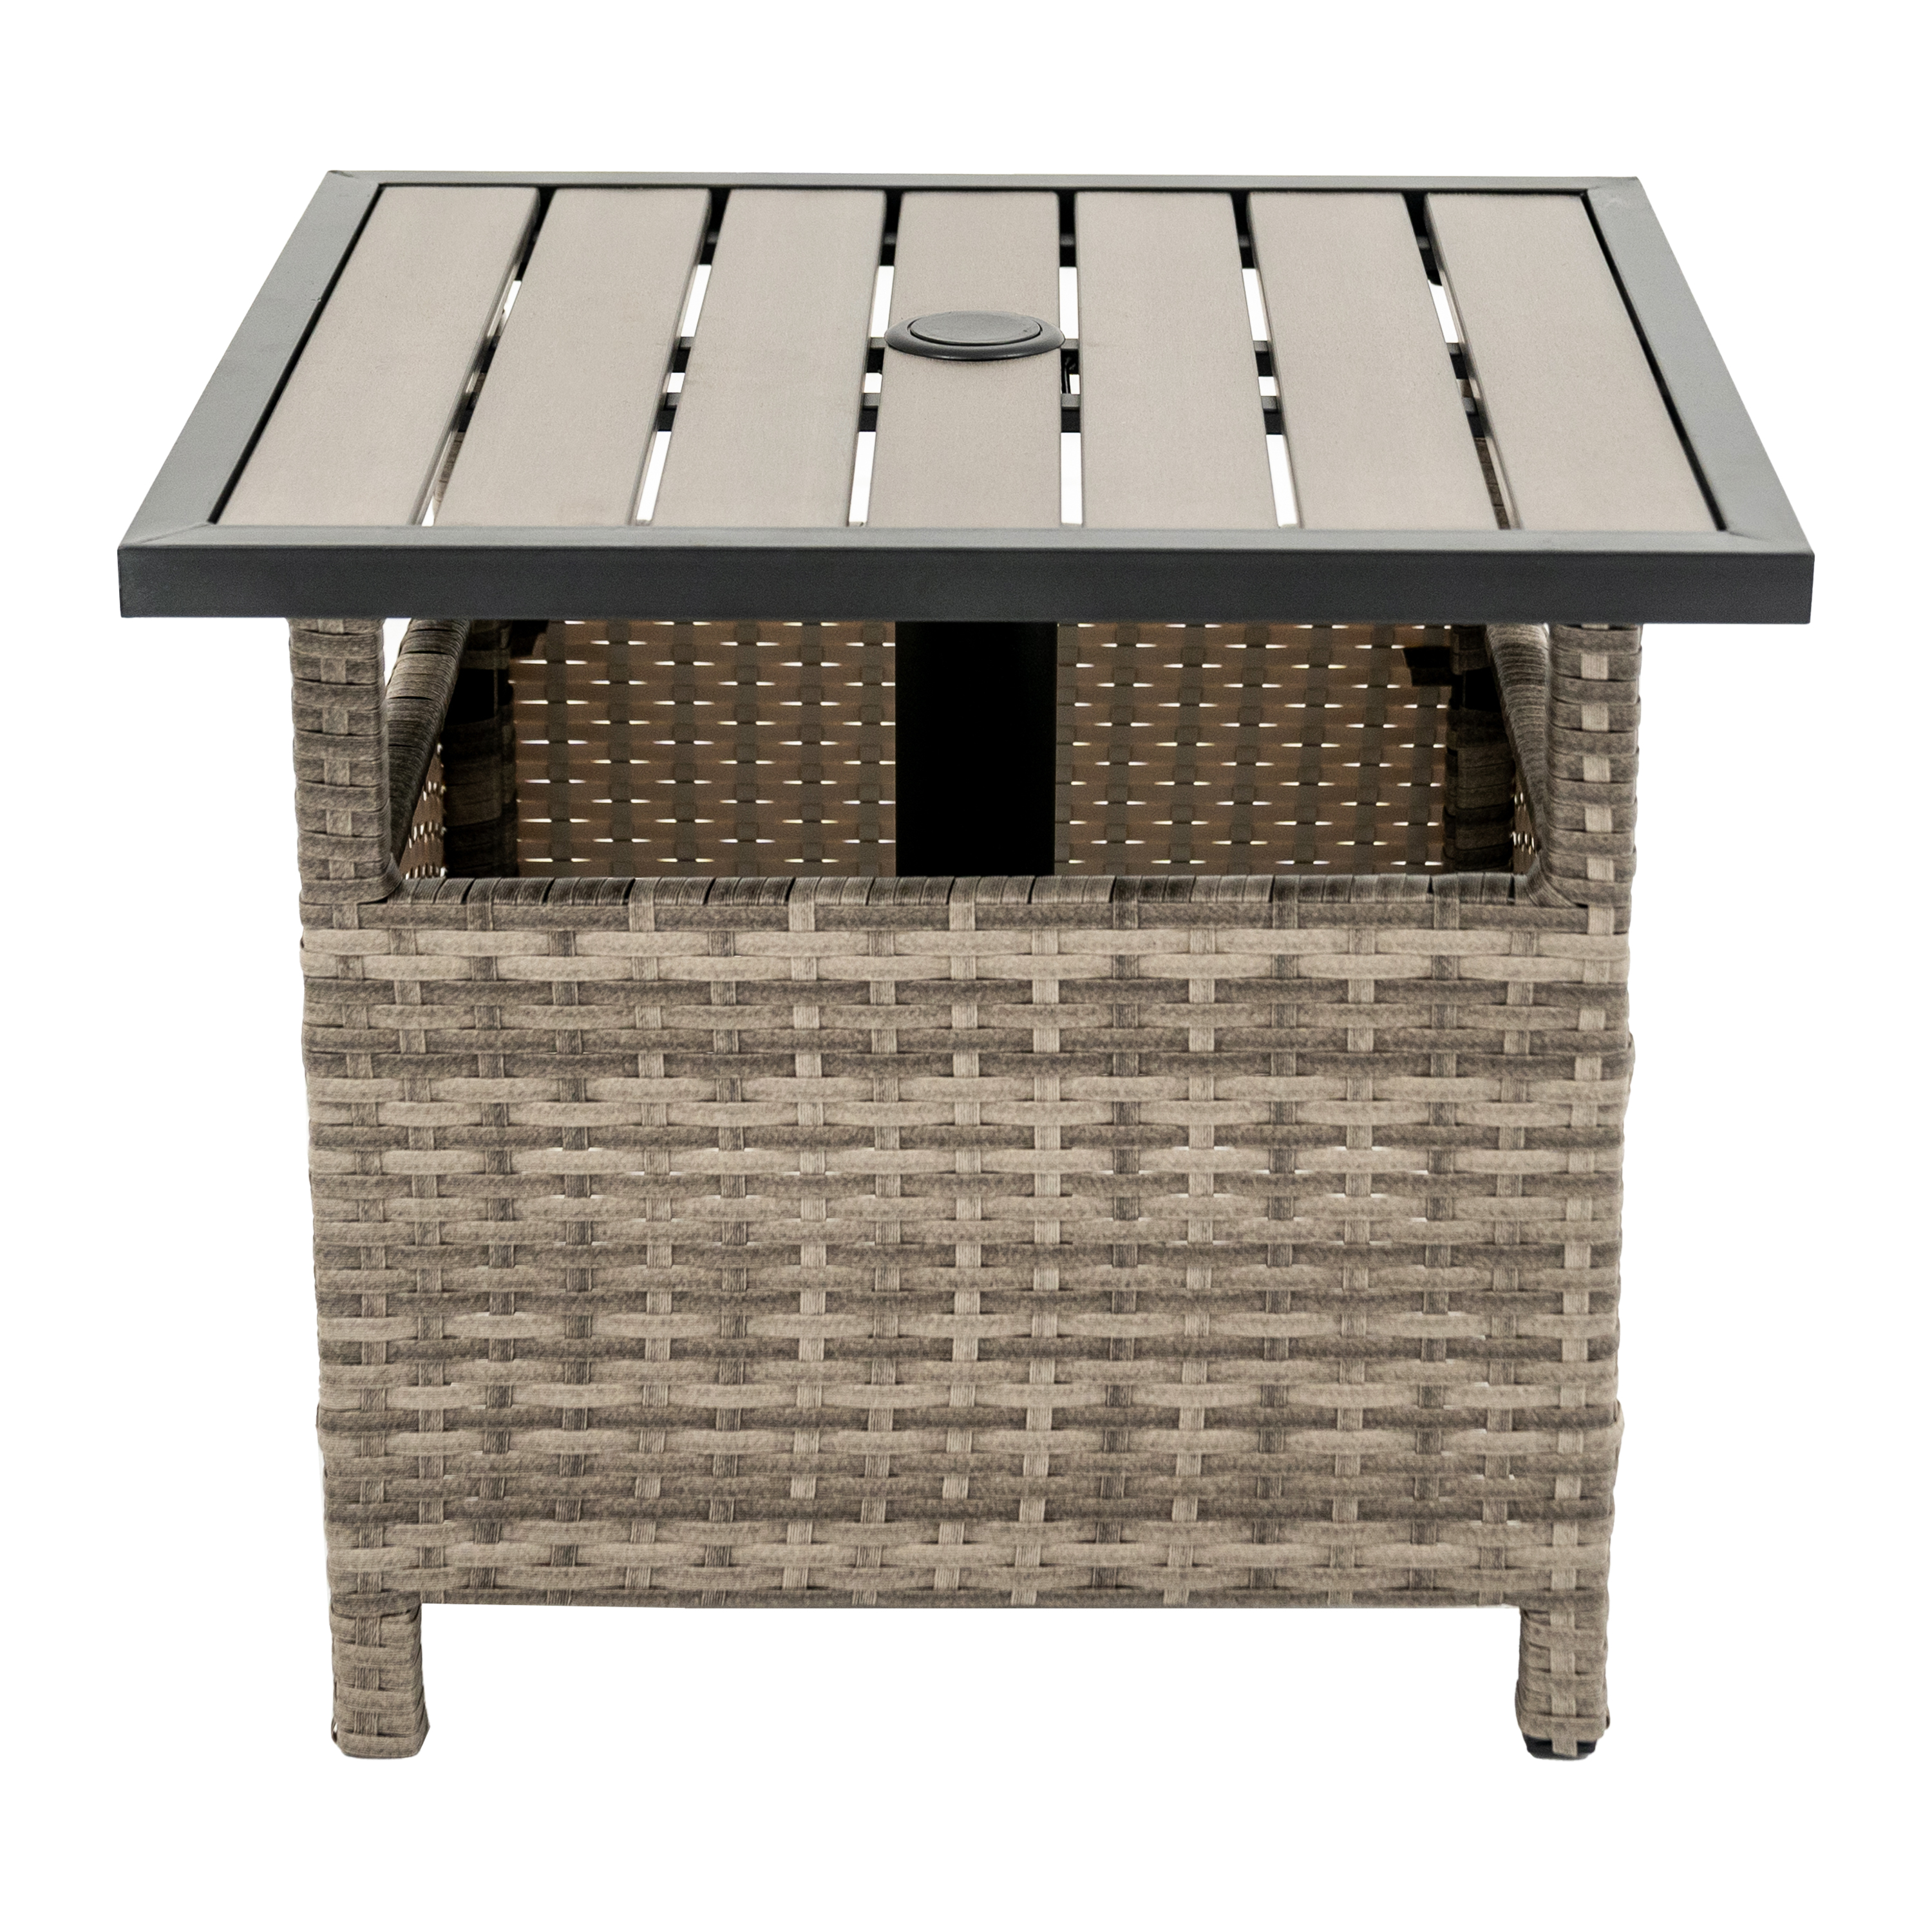 Outdoor Patio Side Table Umbrella Stand All-Weather PE Wicker Rattan Umbrella Table Furniture  for Garden Deck Pool Gray - image 5 of 8